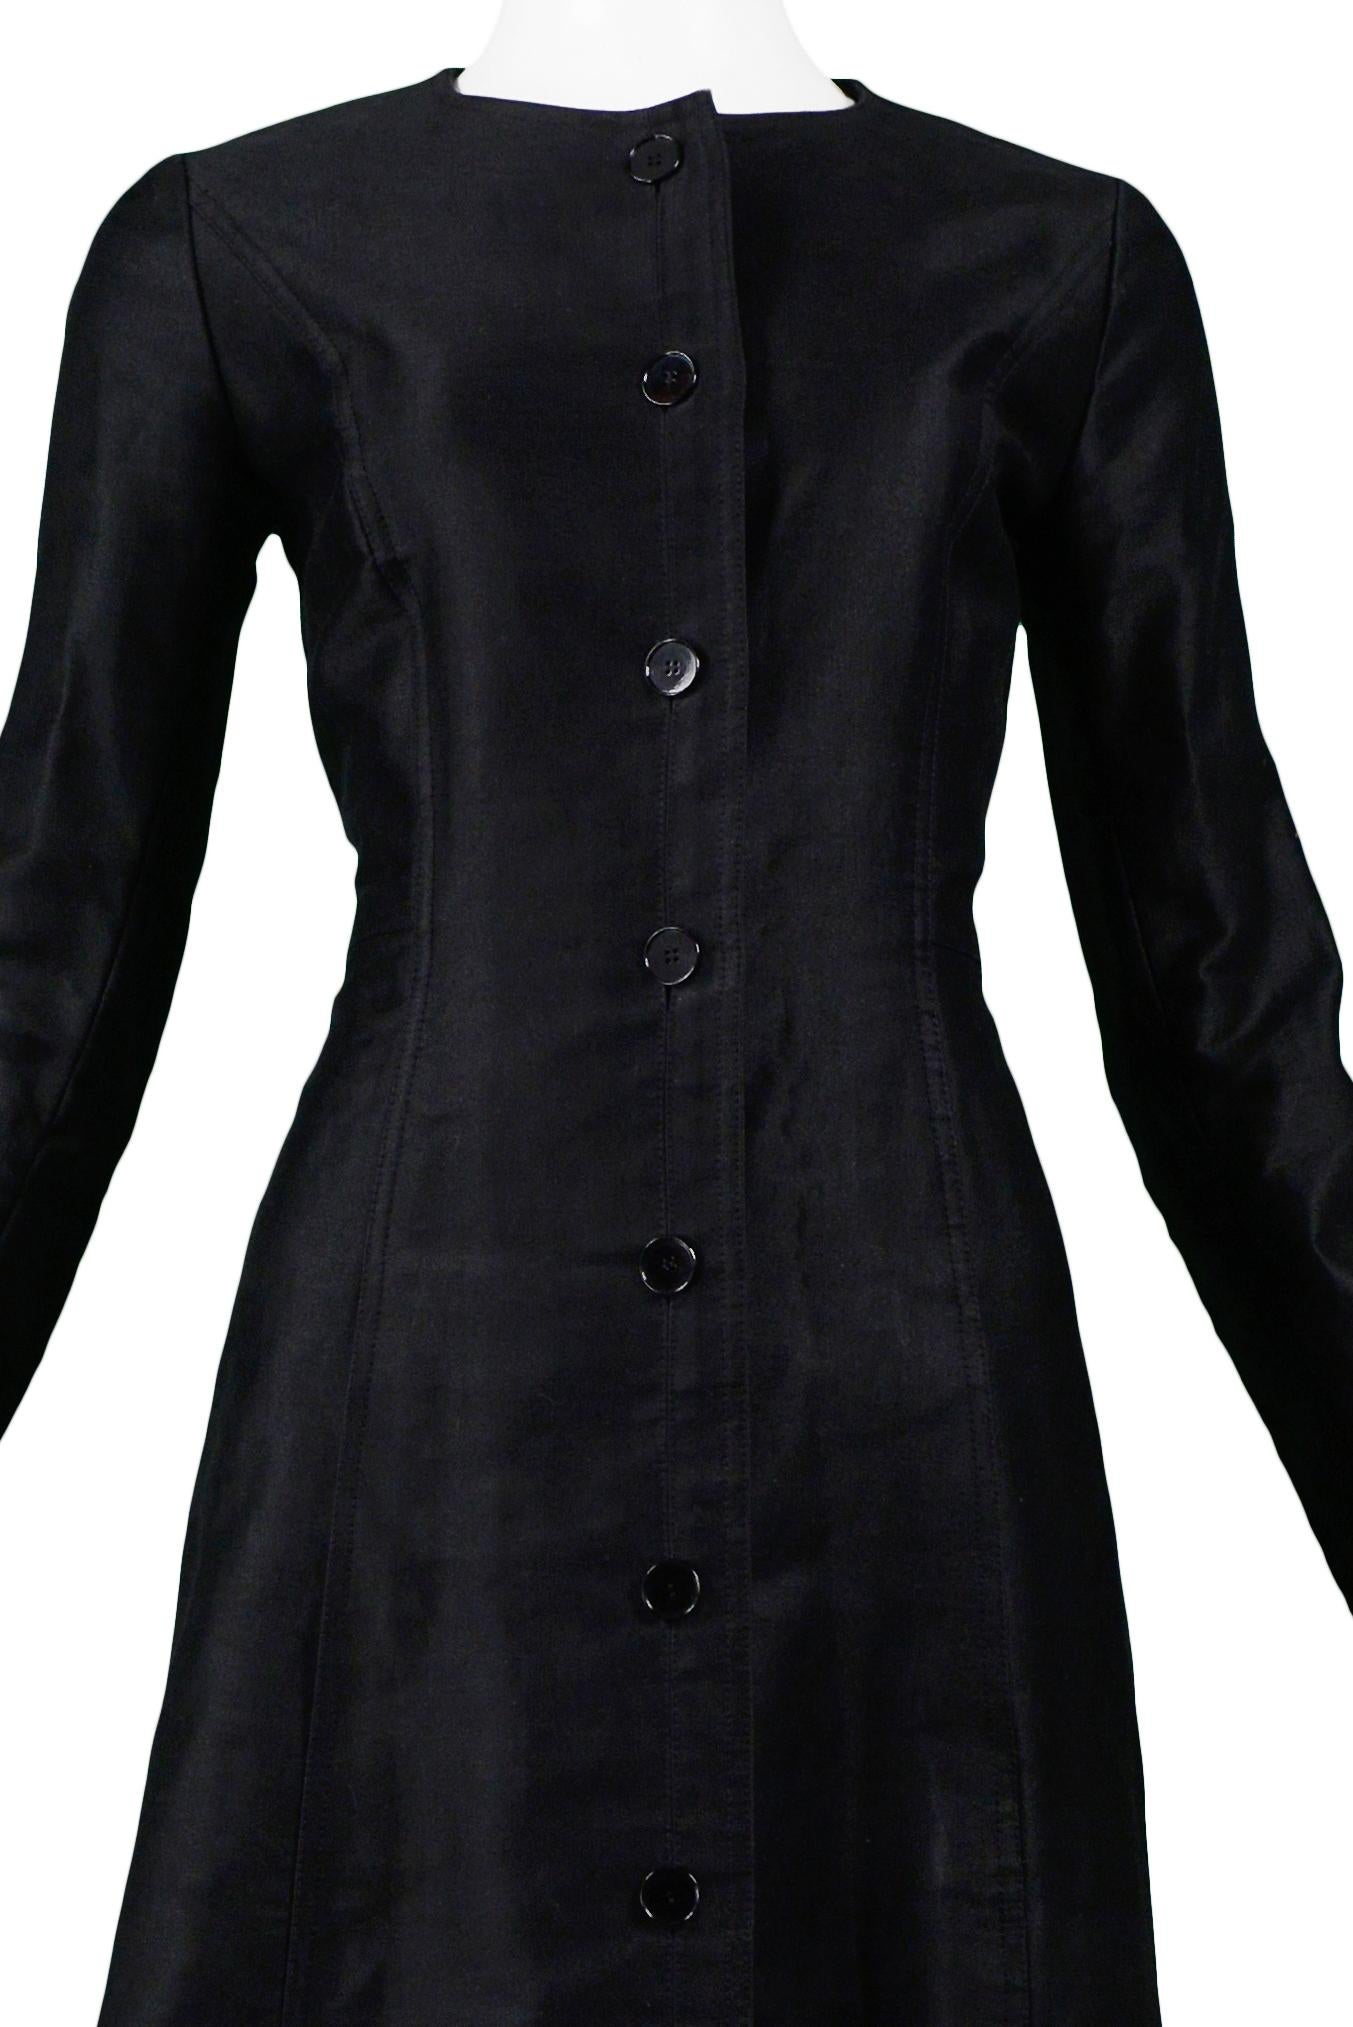 Yves Saint Laurent YSL Black Sateen Button Front Coat 1970s In Excellent Condition For Sale In Los Angeles, CA